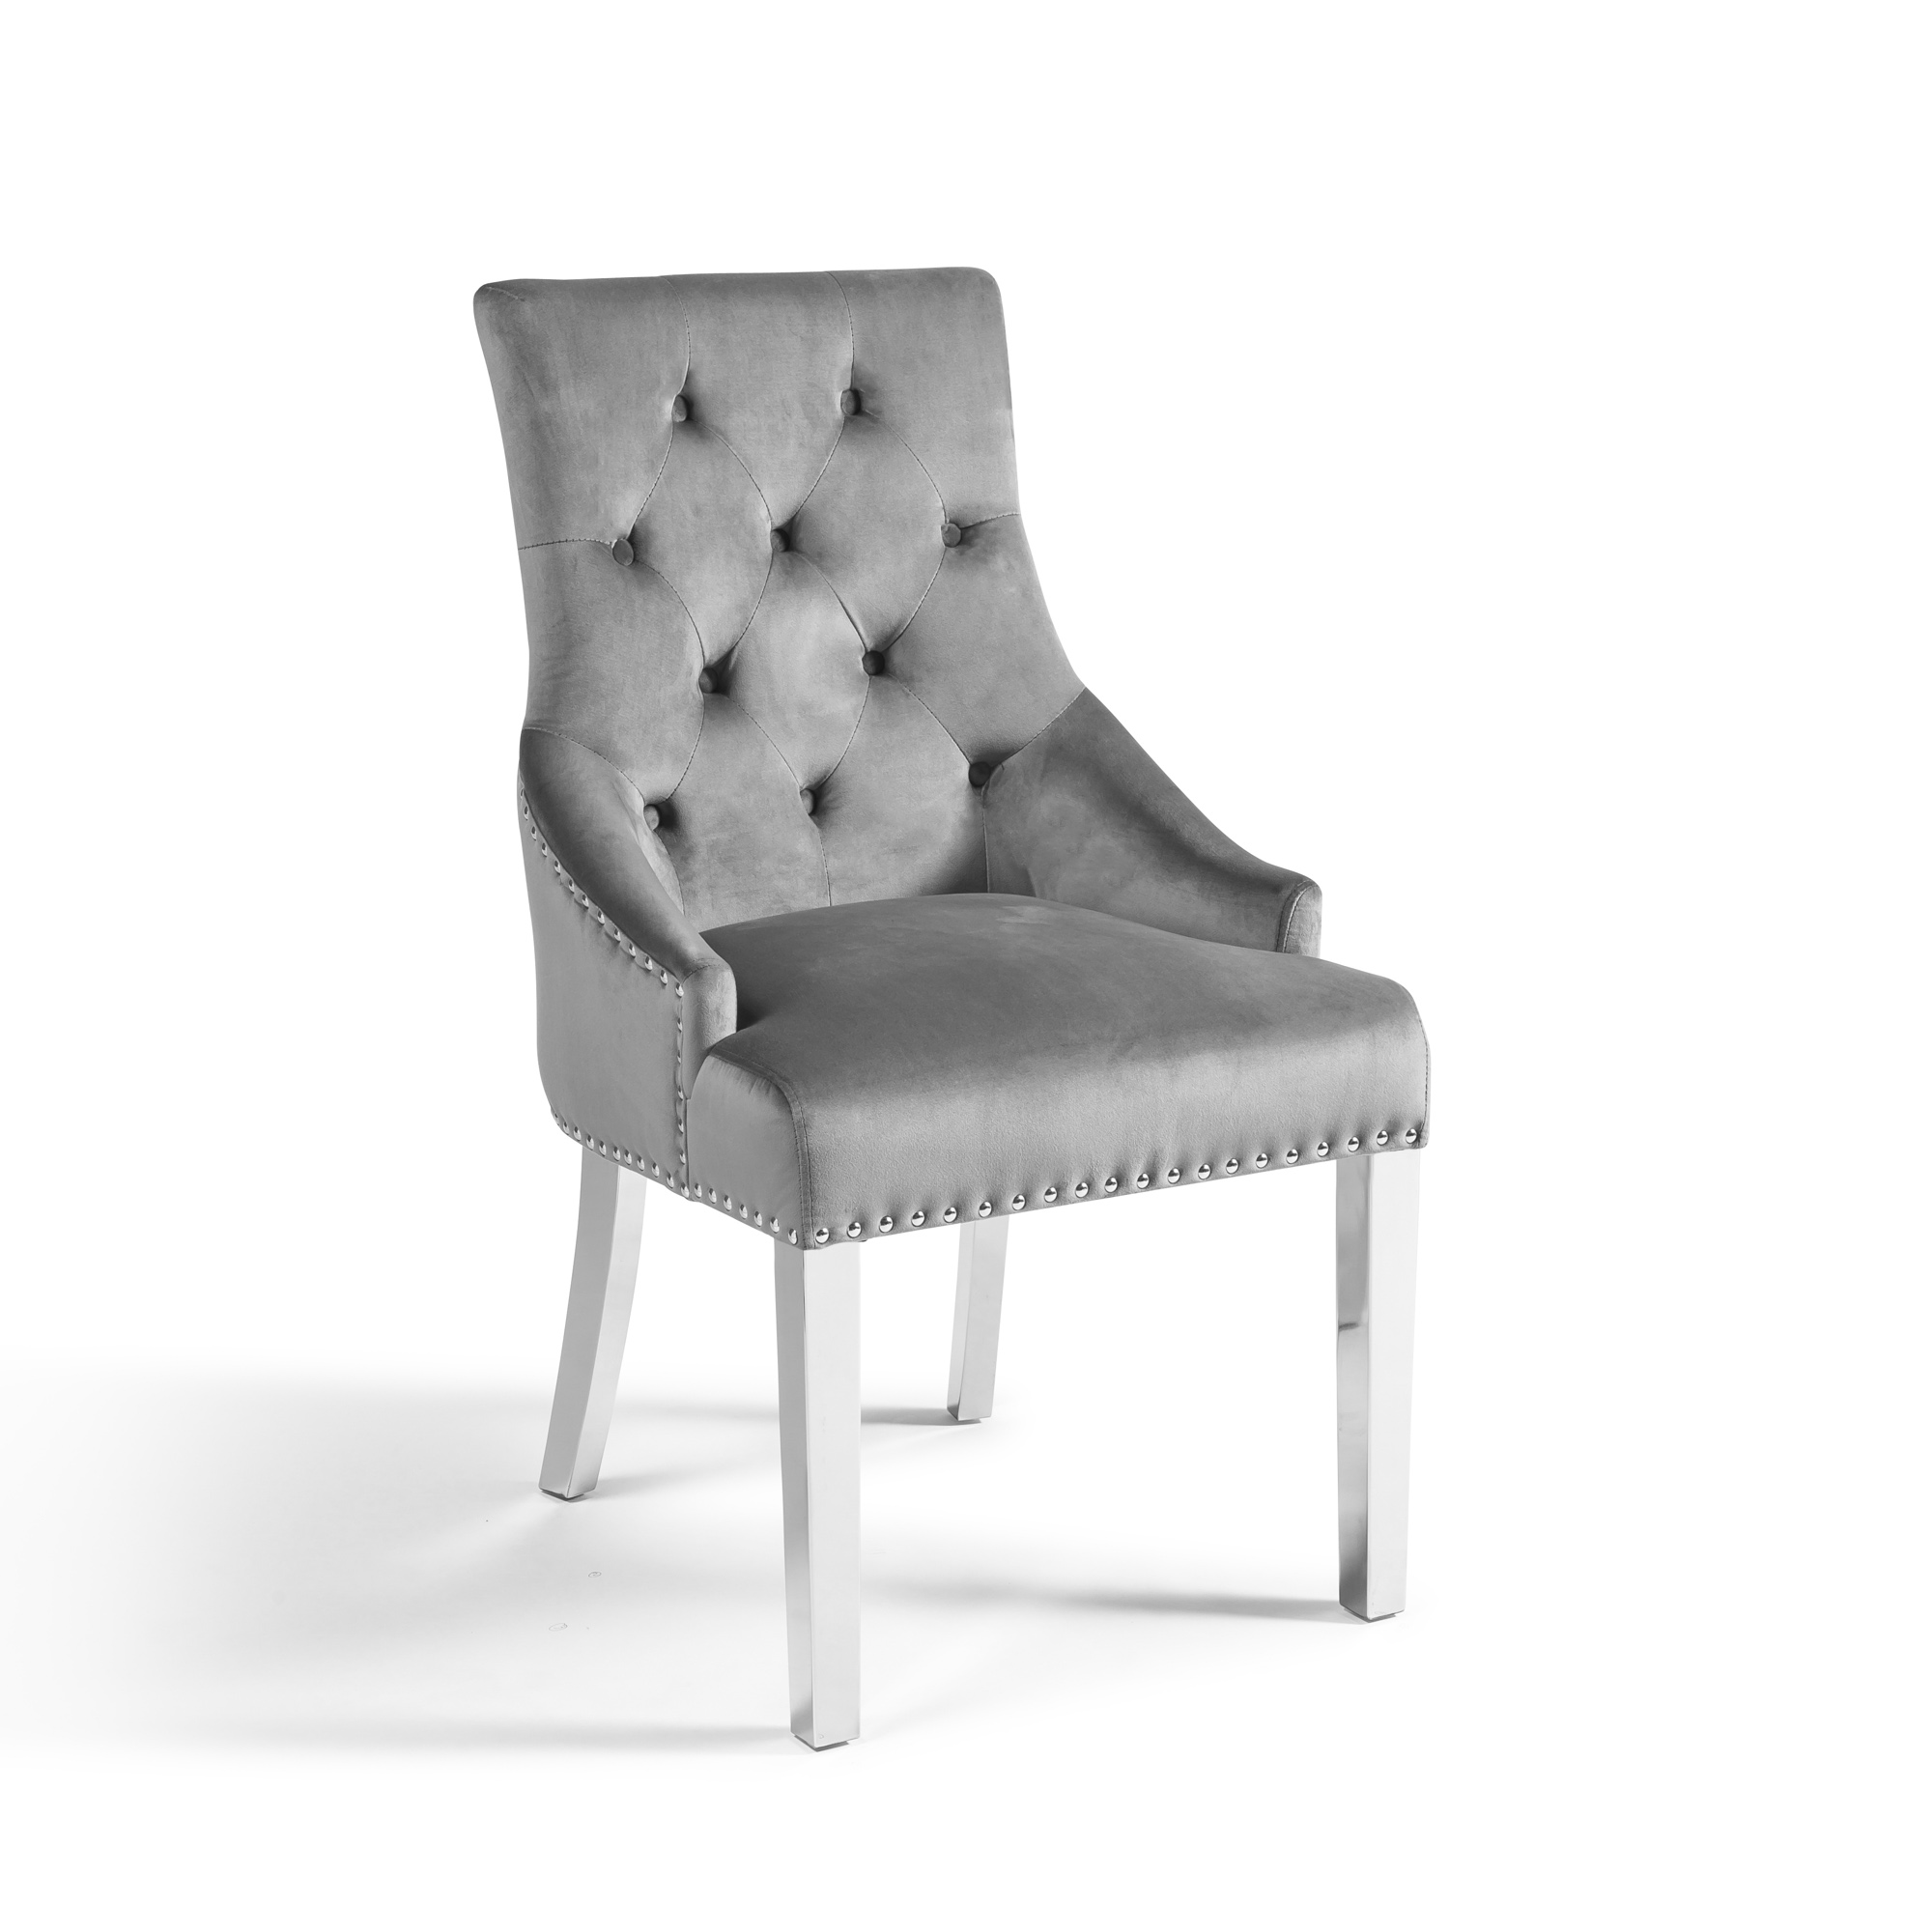 Chelsea Scoop Grey Velvet Dining Chair, Grey Upholstered Dining Chairs With Black Legs